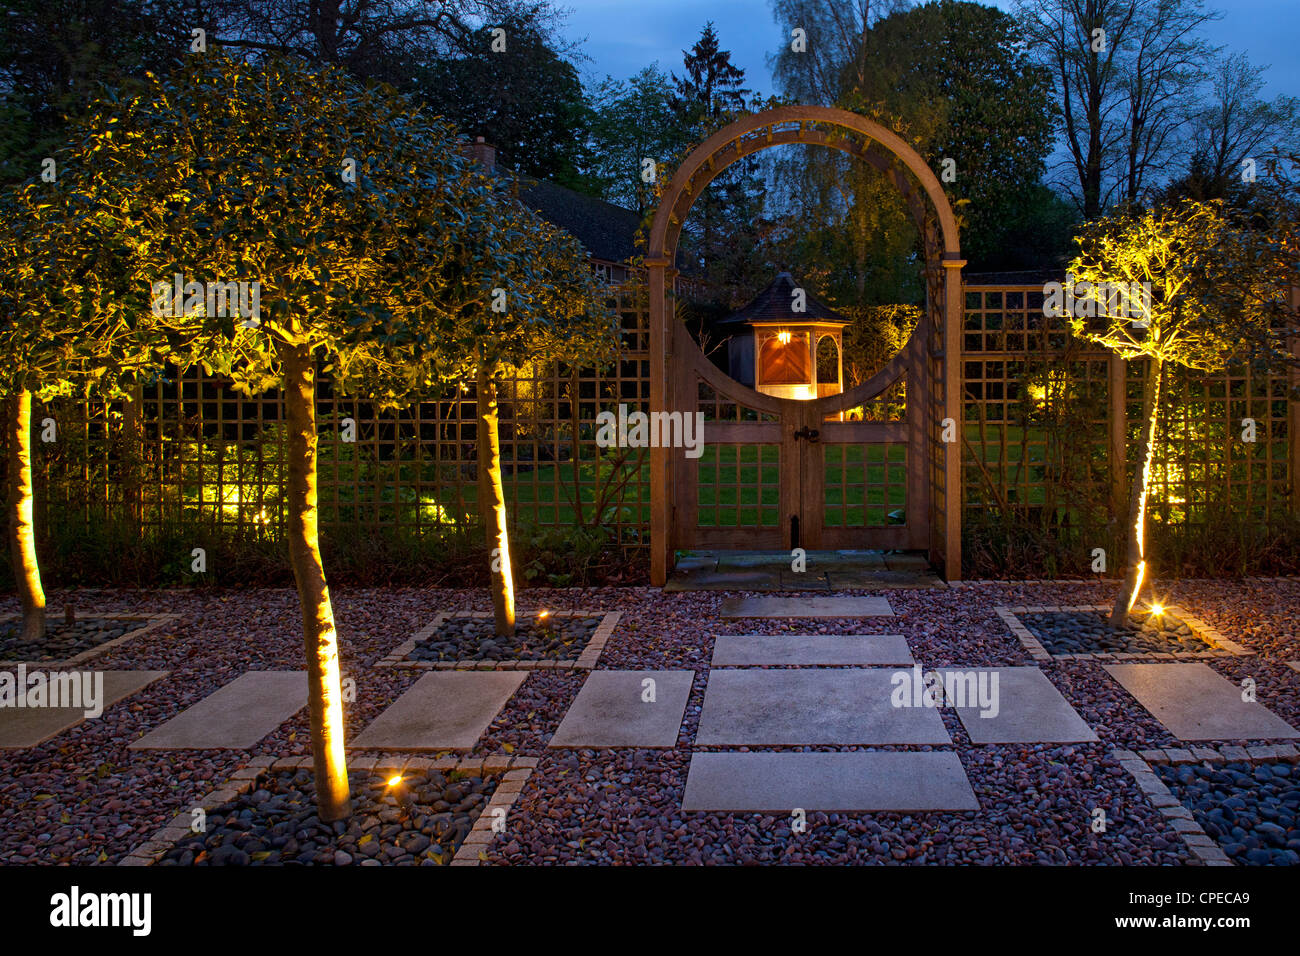 Garden feature Arch at night with holly trees lit and gates leading into lawn area with illuminated Gazebo Stock Photo